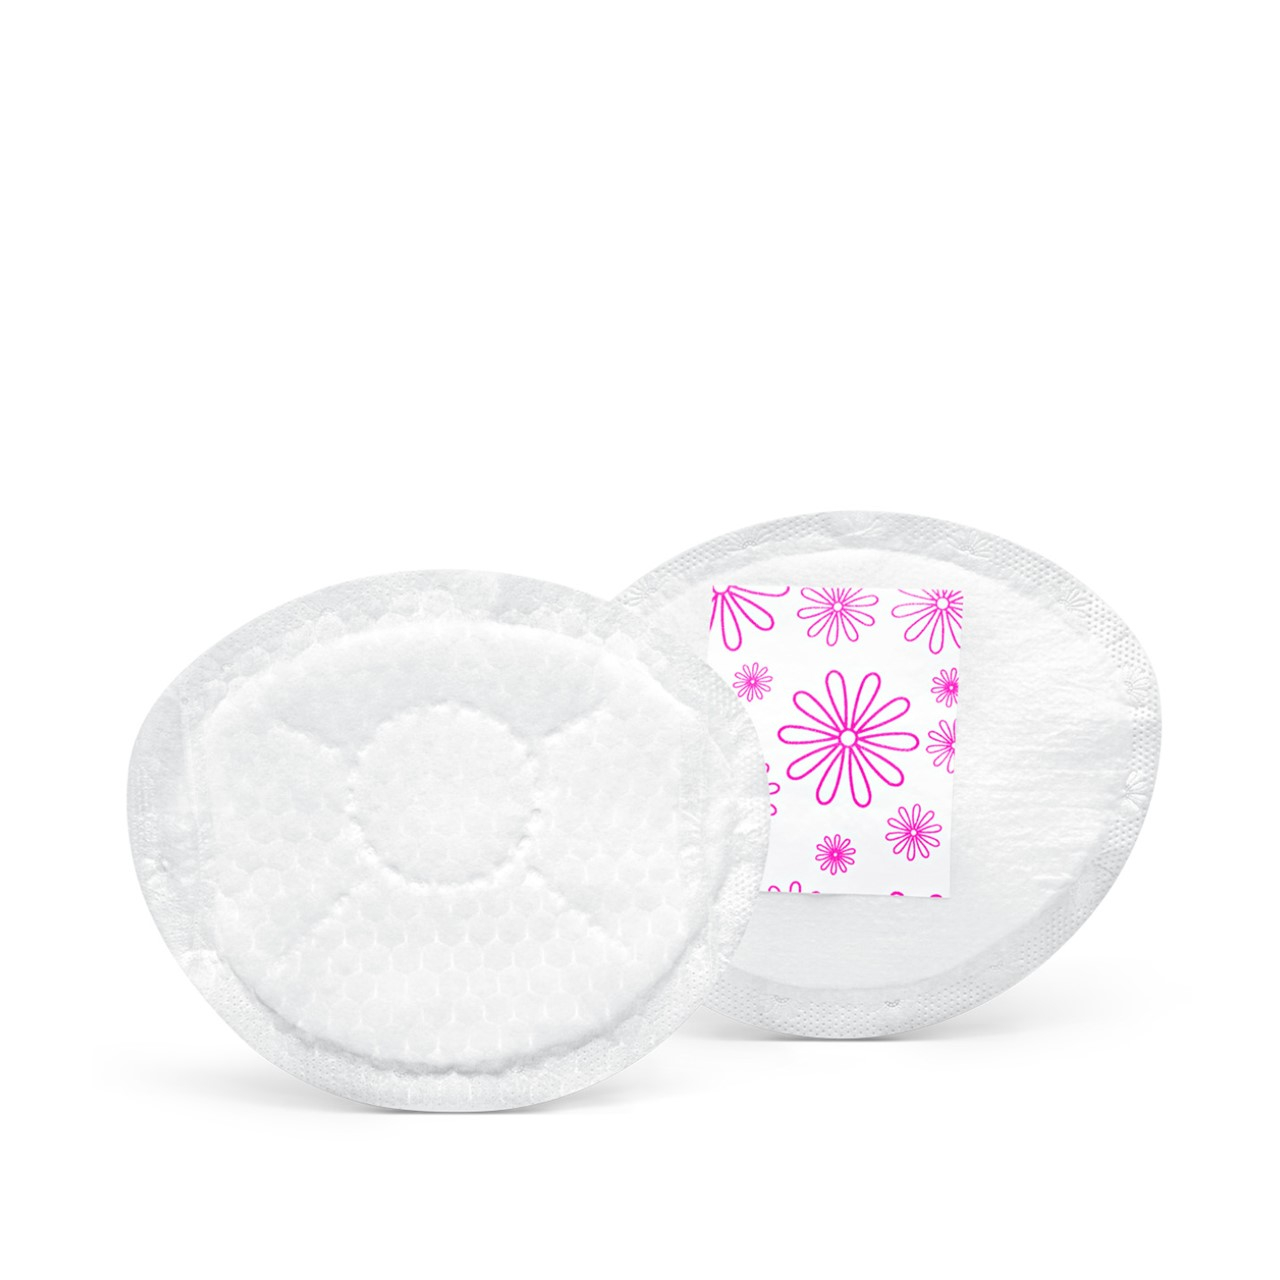 Disposable Nursing Pads Breathable Breast Feeding Pads Soft Disposable  Breast Pads for Women - China Soft Disposable Breast Pads and Breathable Breast  Feeding Pads price